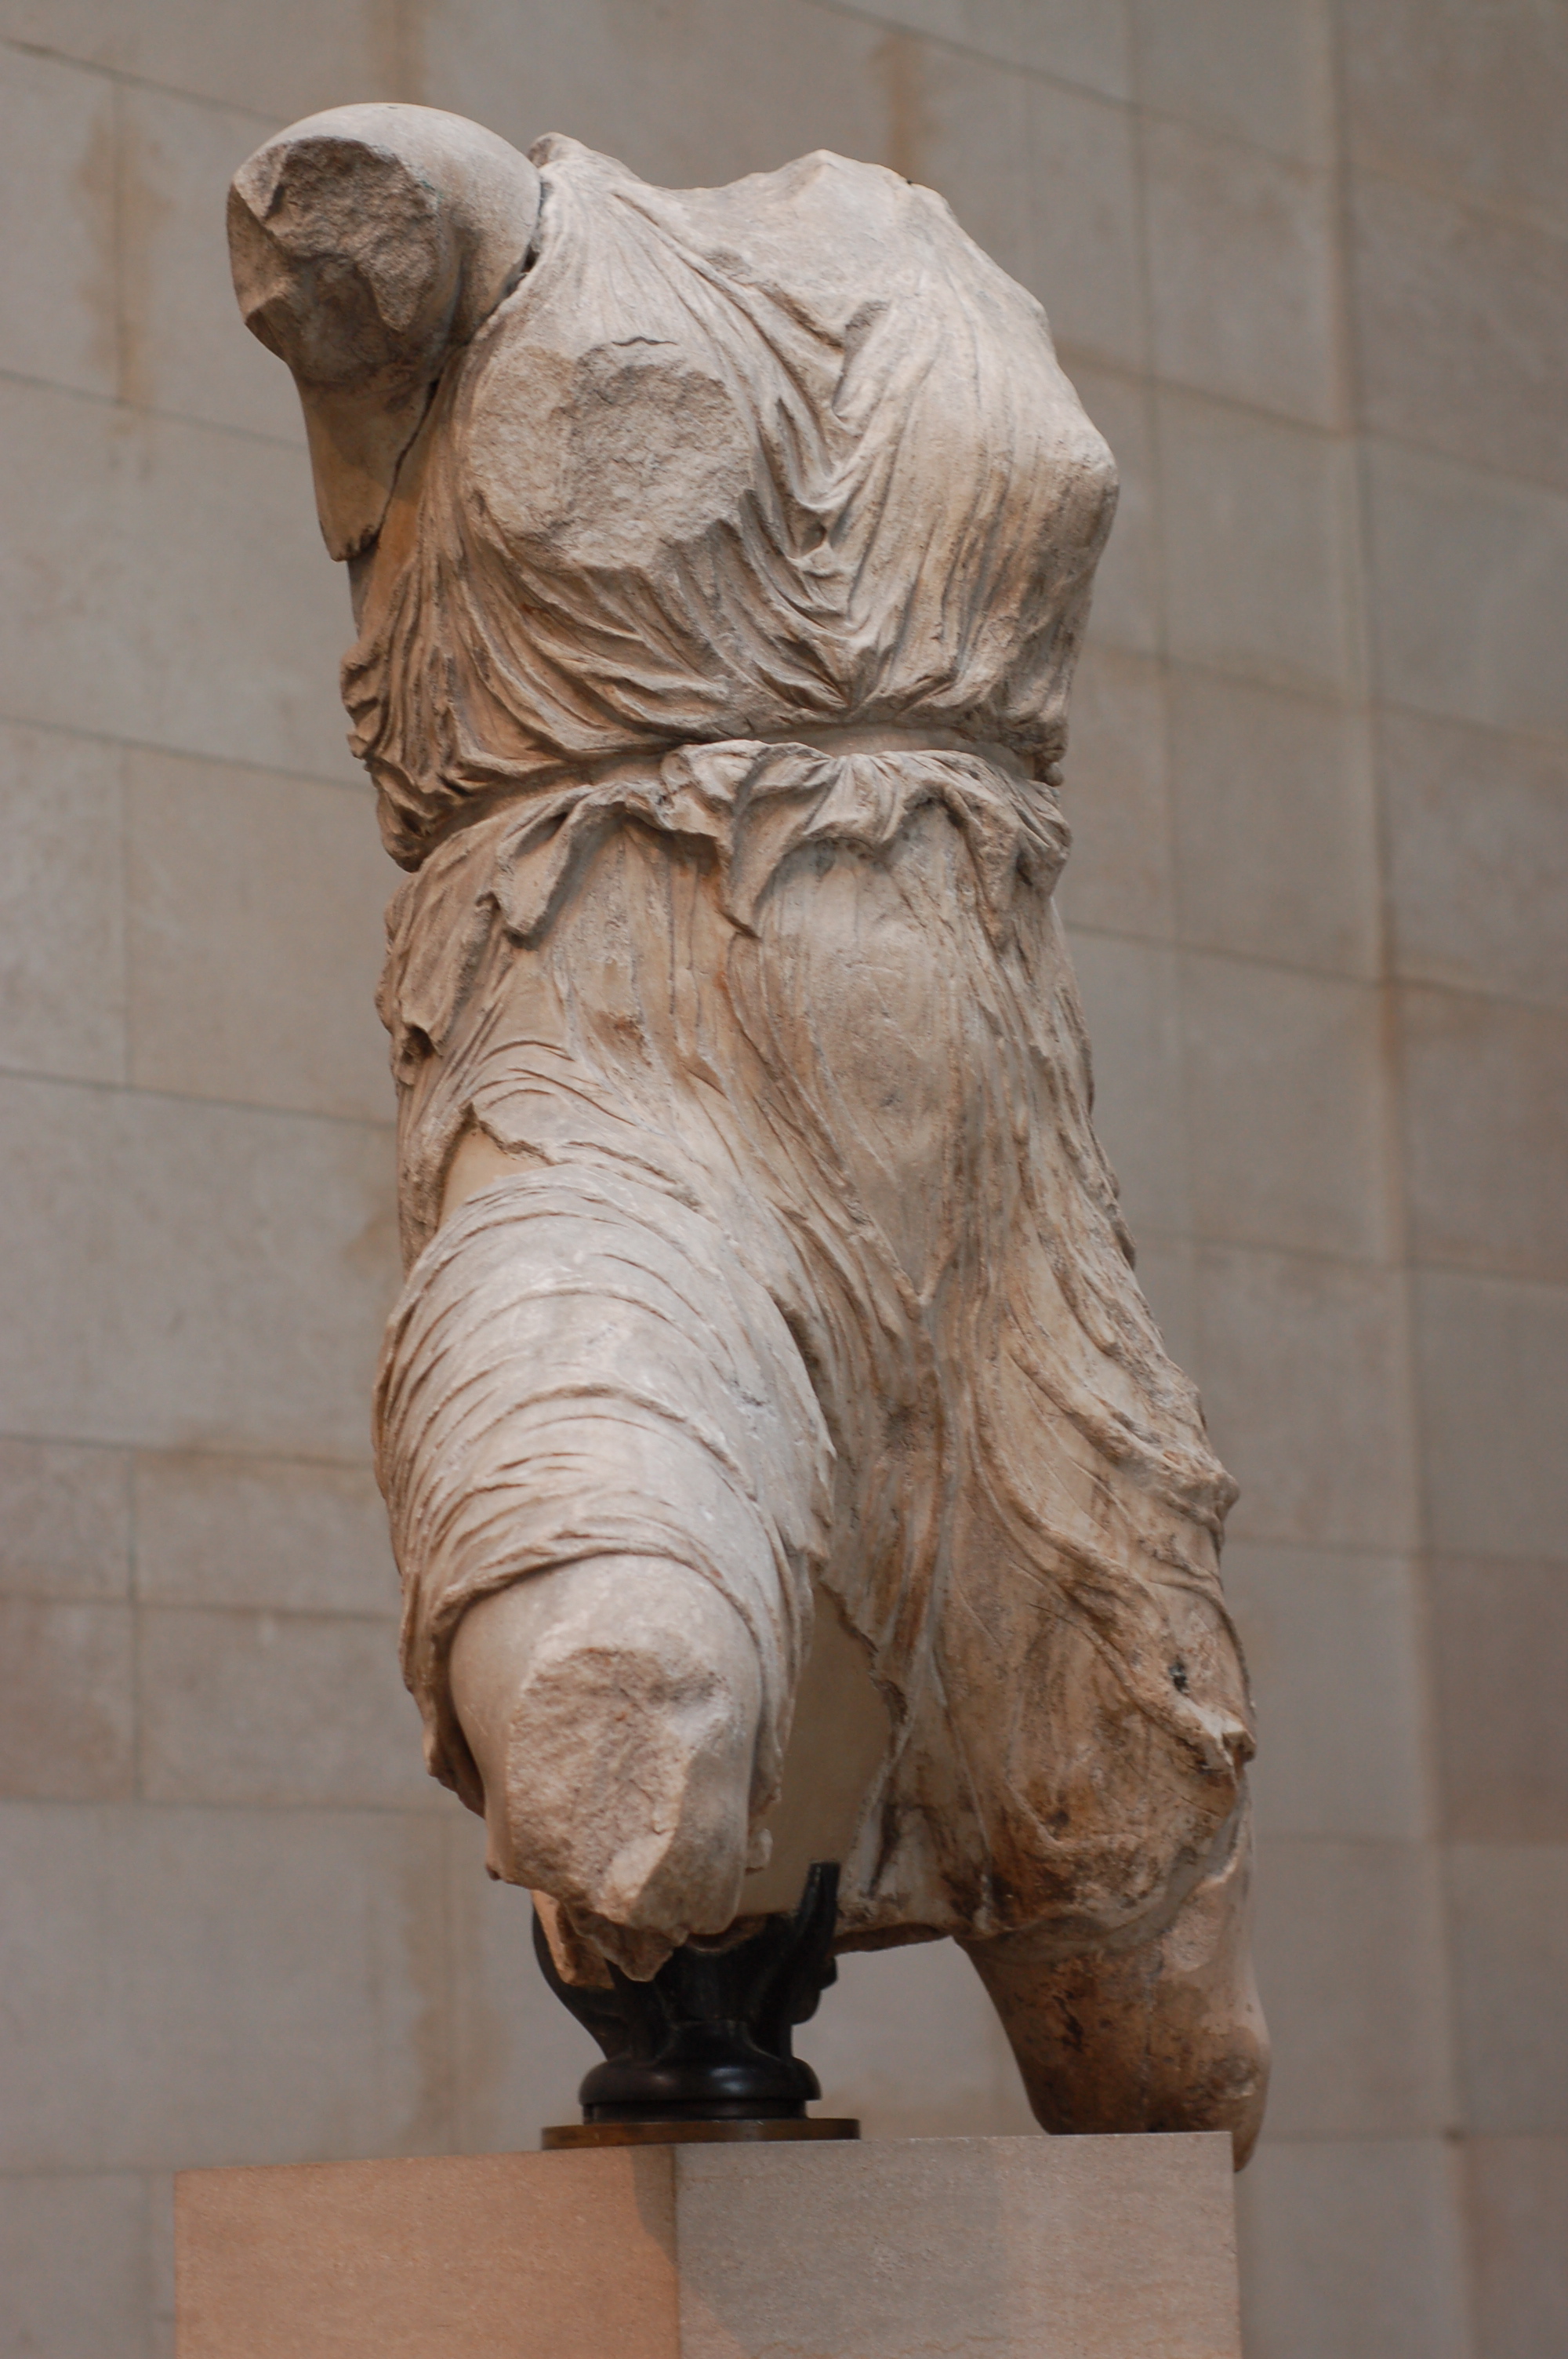 Statue from the Elgin Marbles at the British Museum